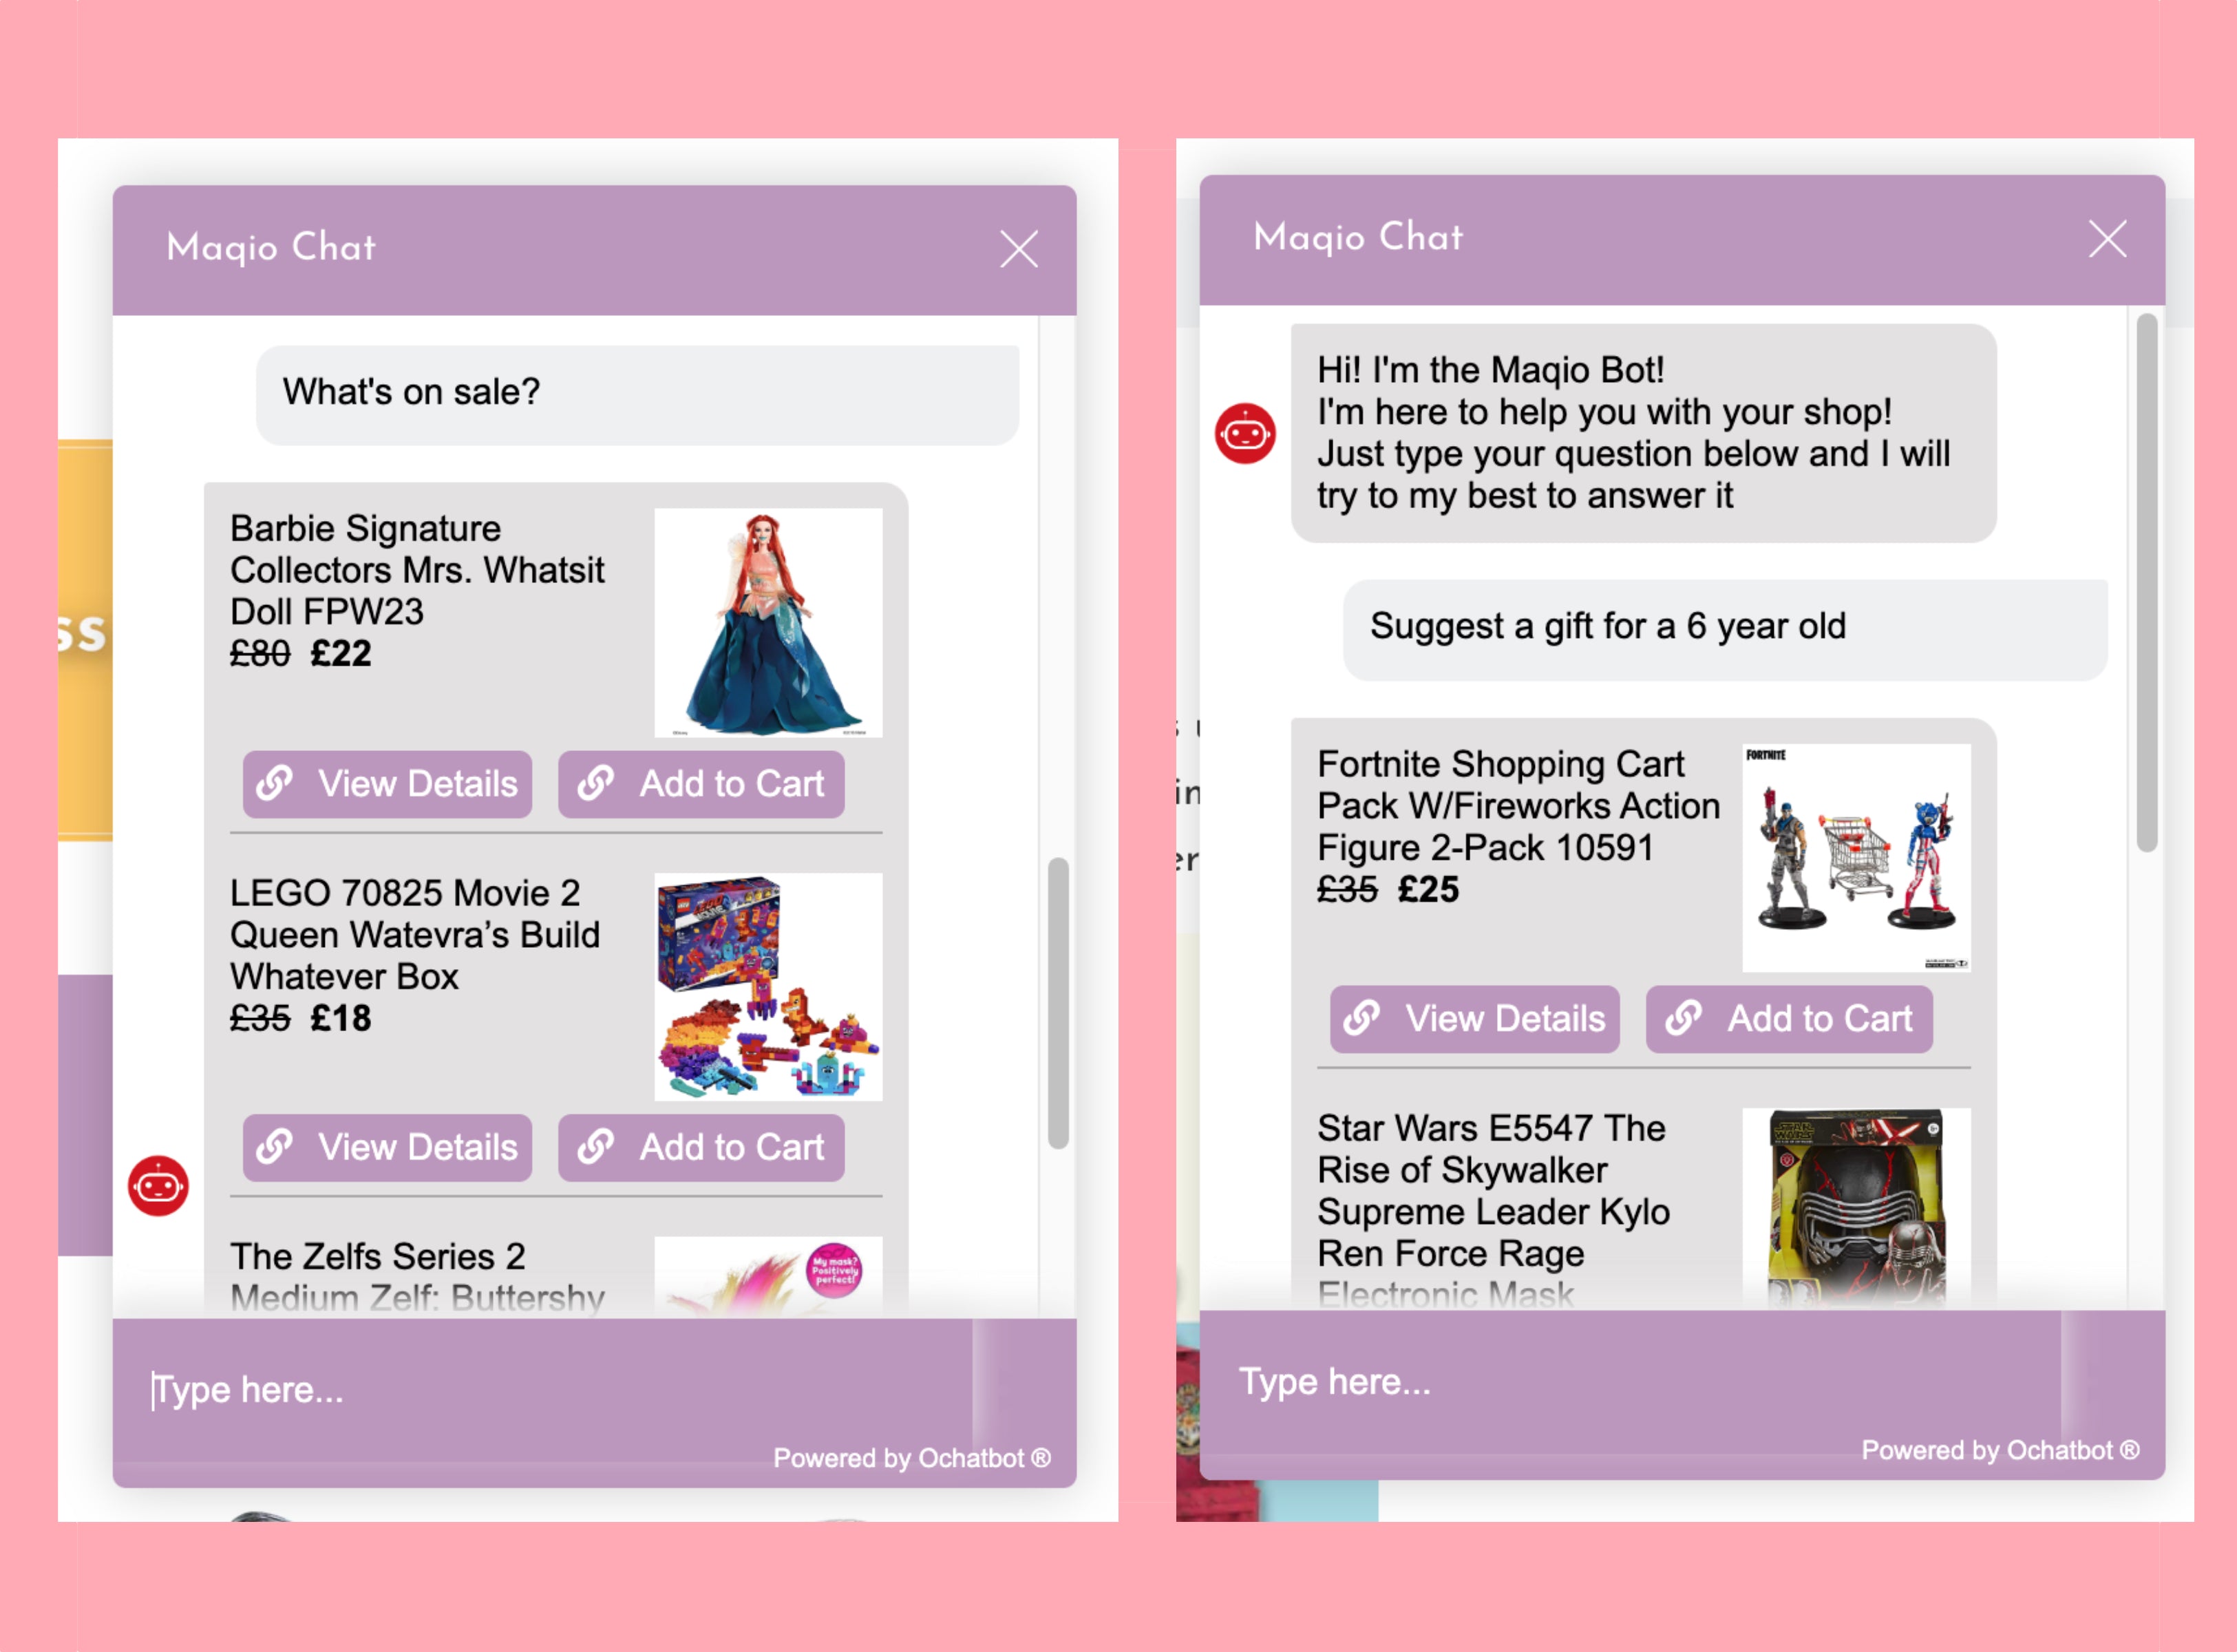 Screen grab from a chatbot from the website of Maqio Toys